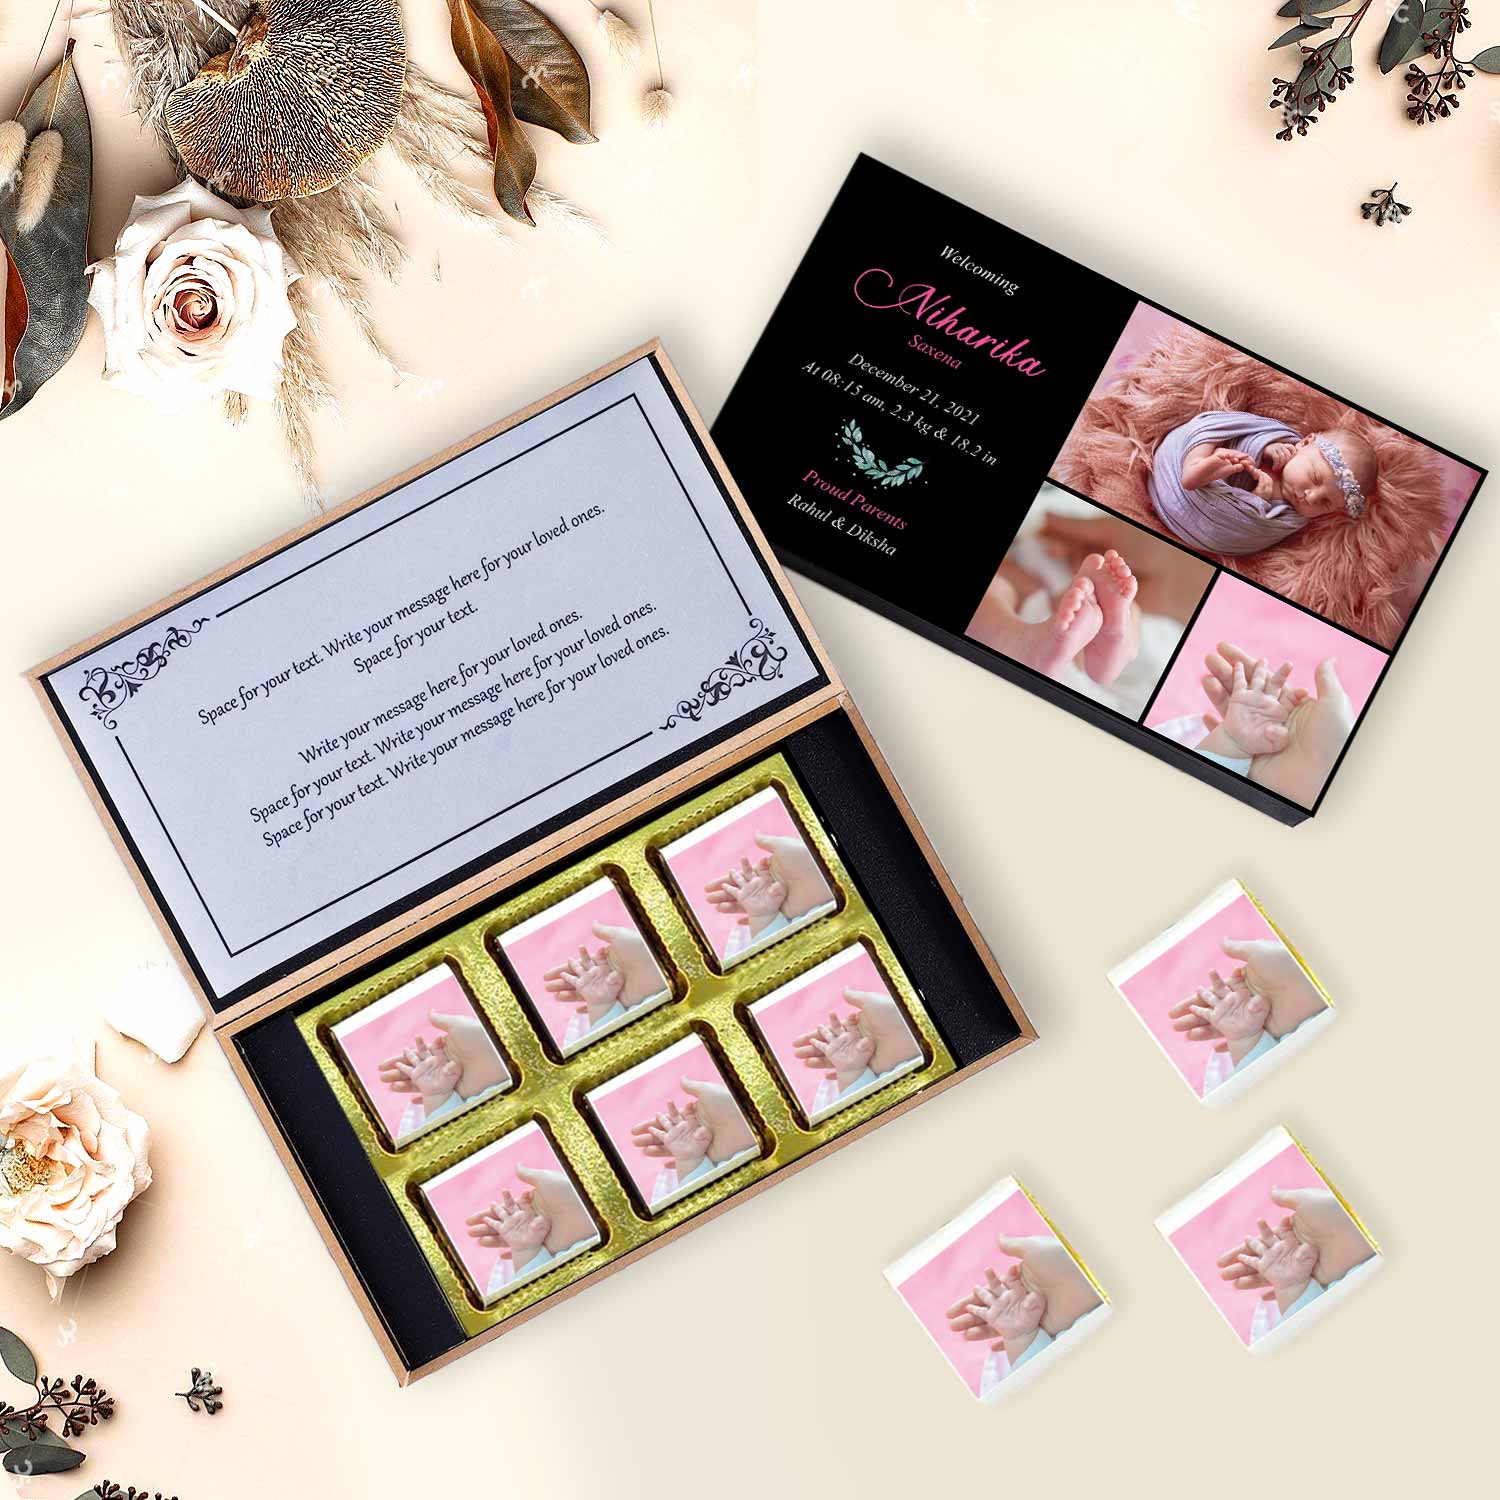   Baby birth announcement messages.  Funny baby girl announcement.  How to announce baby birth in office.  Baby girl announcement chocolate boxes.  Baby girl announcement boxes.